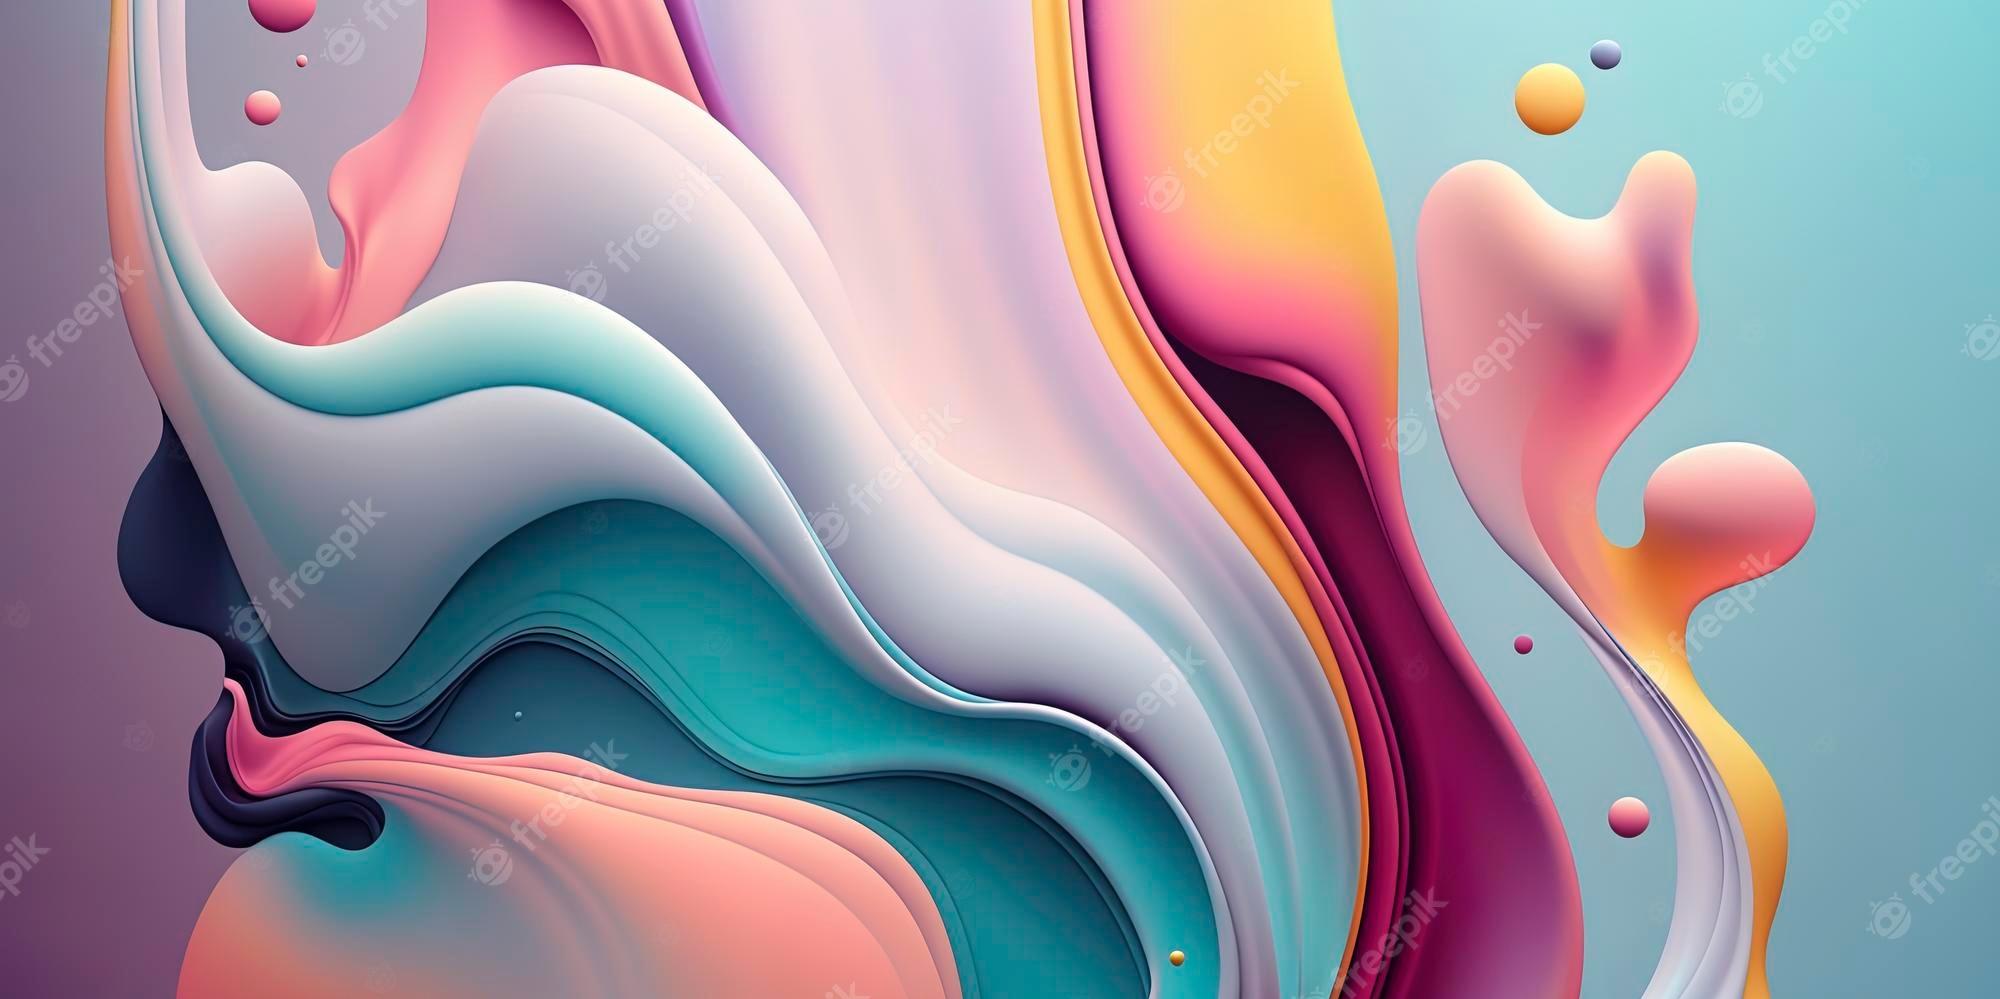 🔥 Download Premium Photo Amazing Abstract Wallpaper With Soft Pastel ...